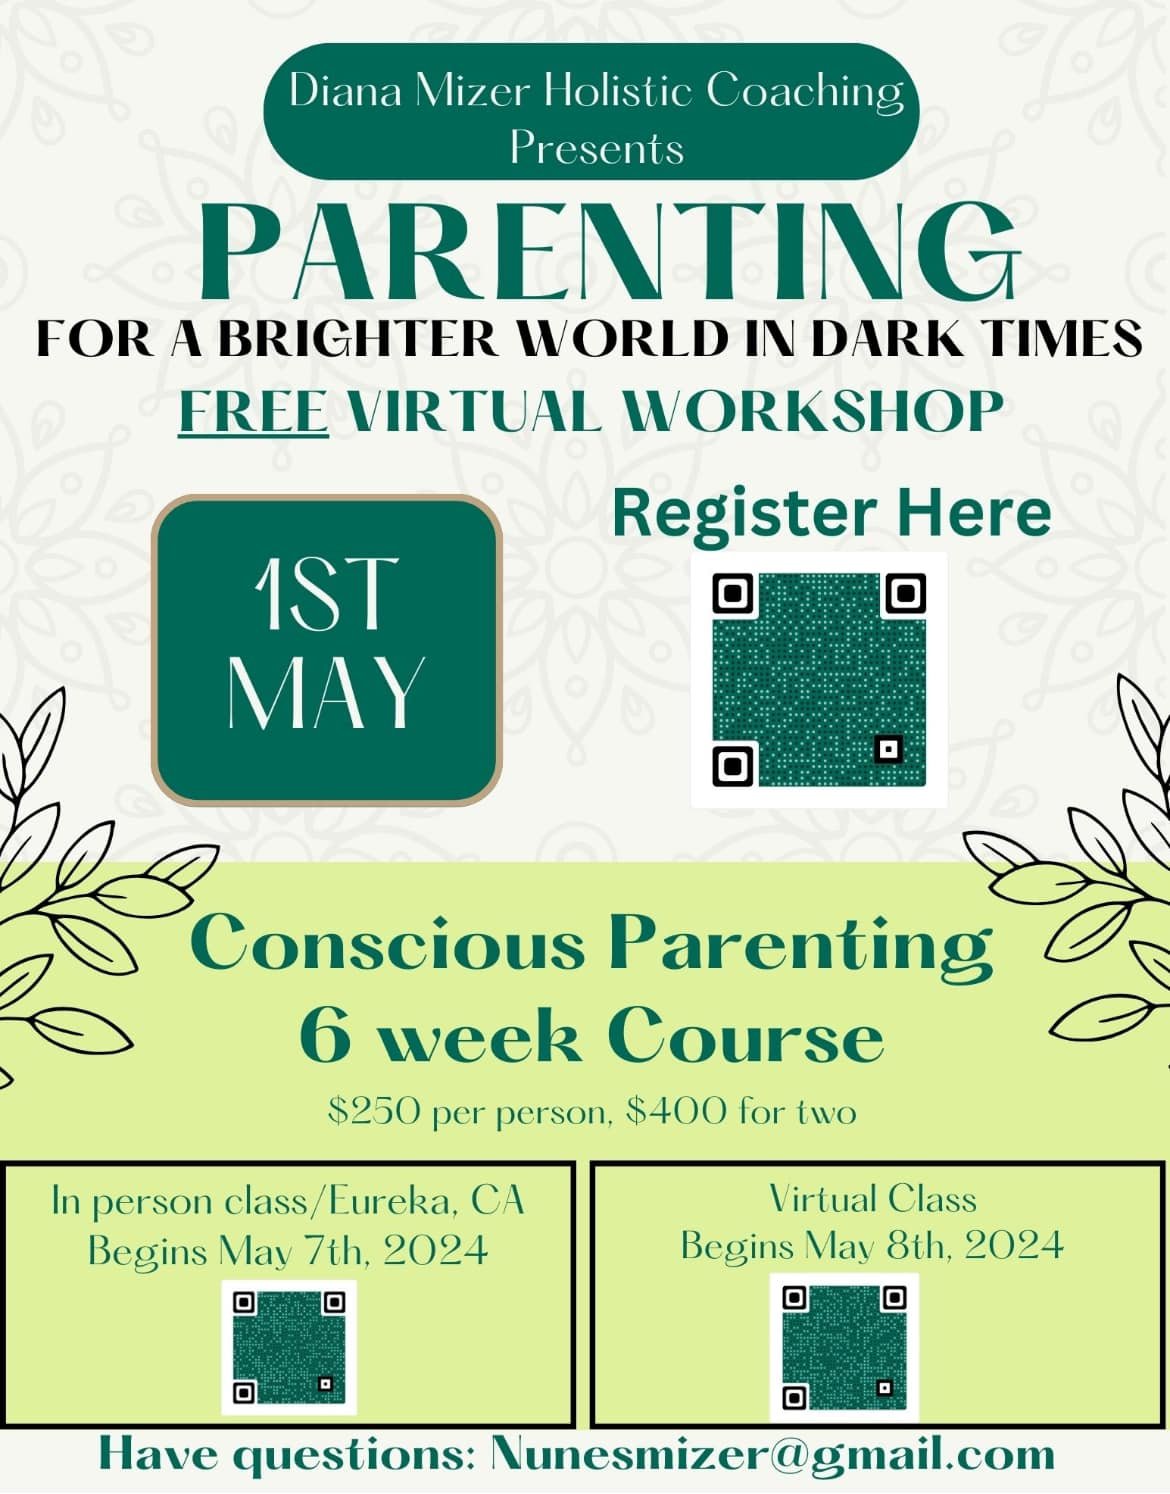 Free online workshop this week! 

Wednesday May 1st attend live at noon or catch the recording. Use the fancy QR codes to register. Or message me for more info.